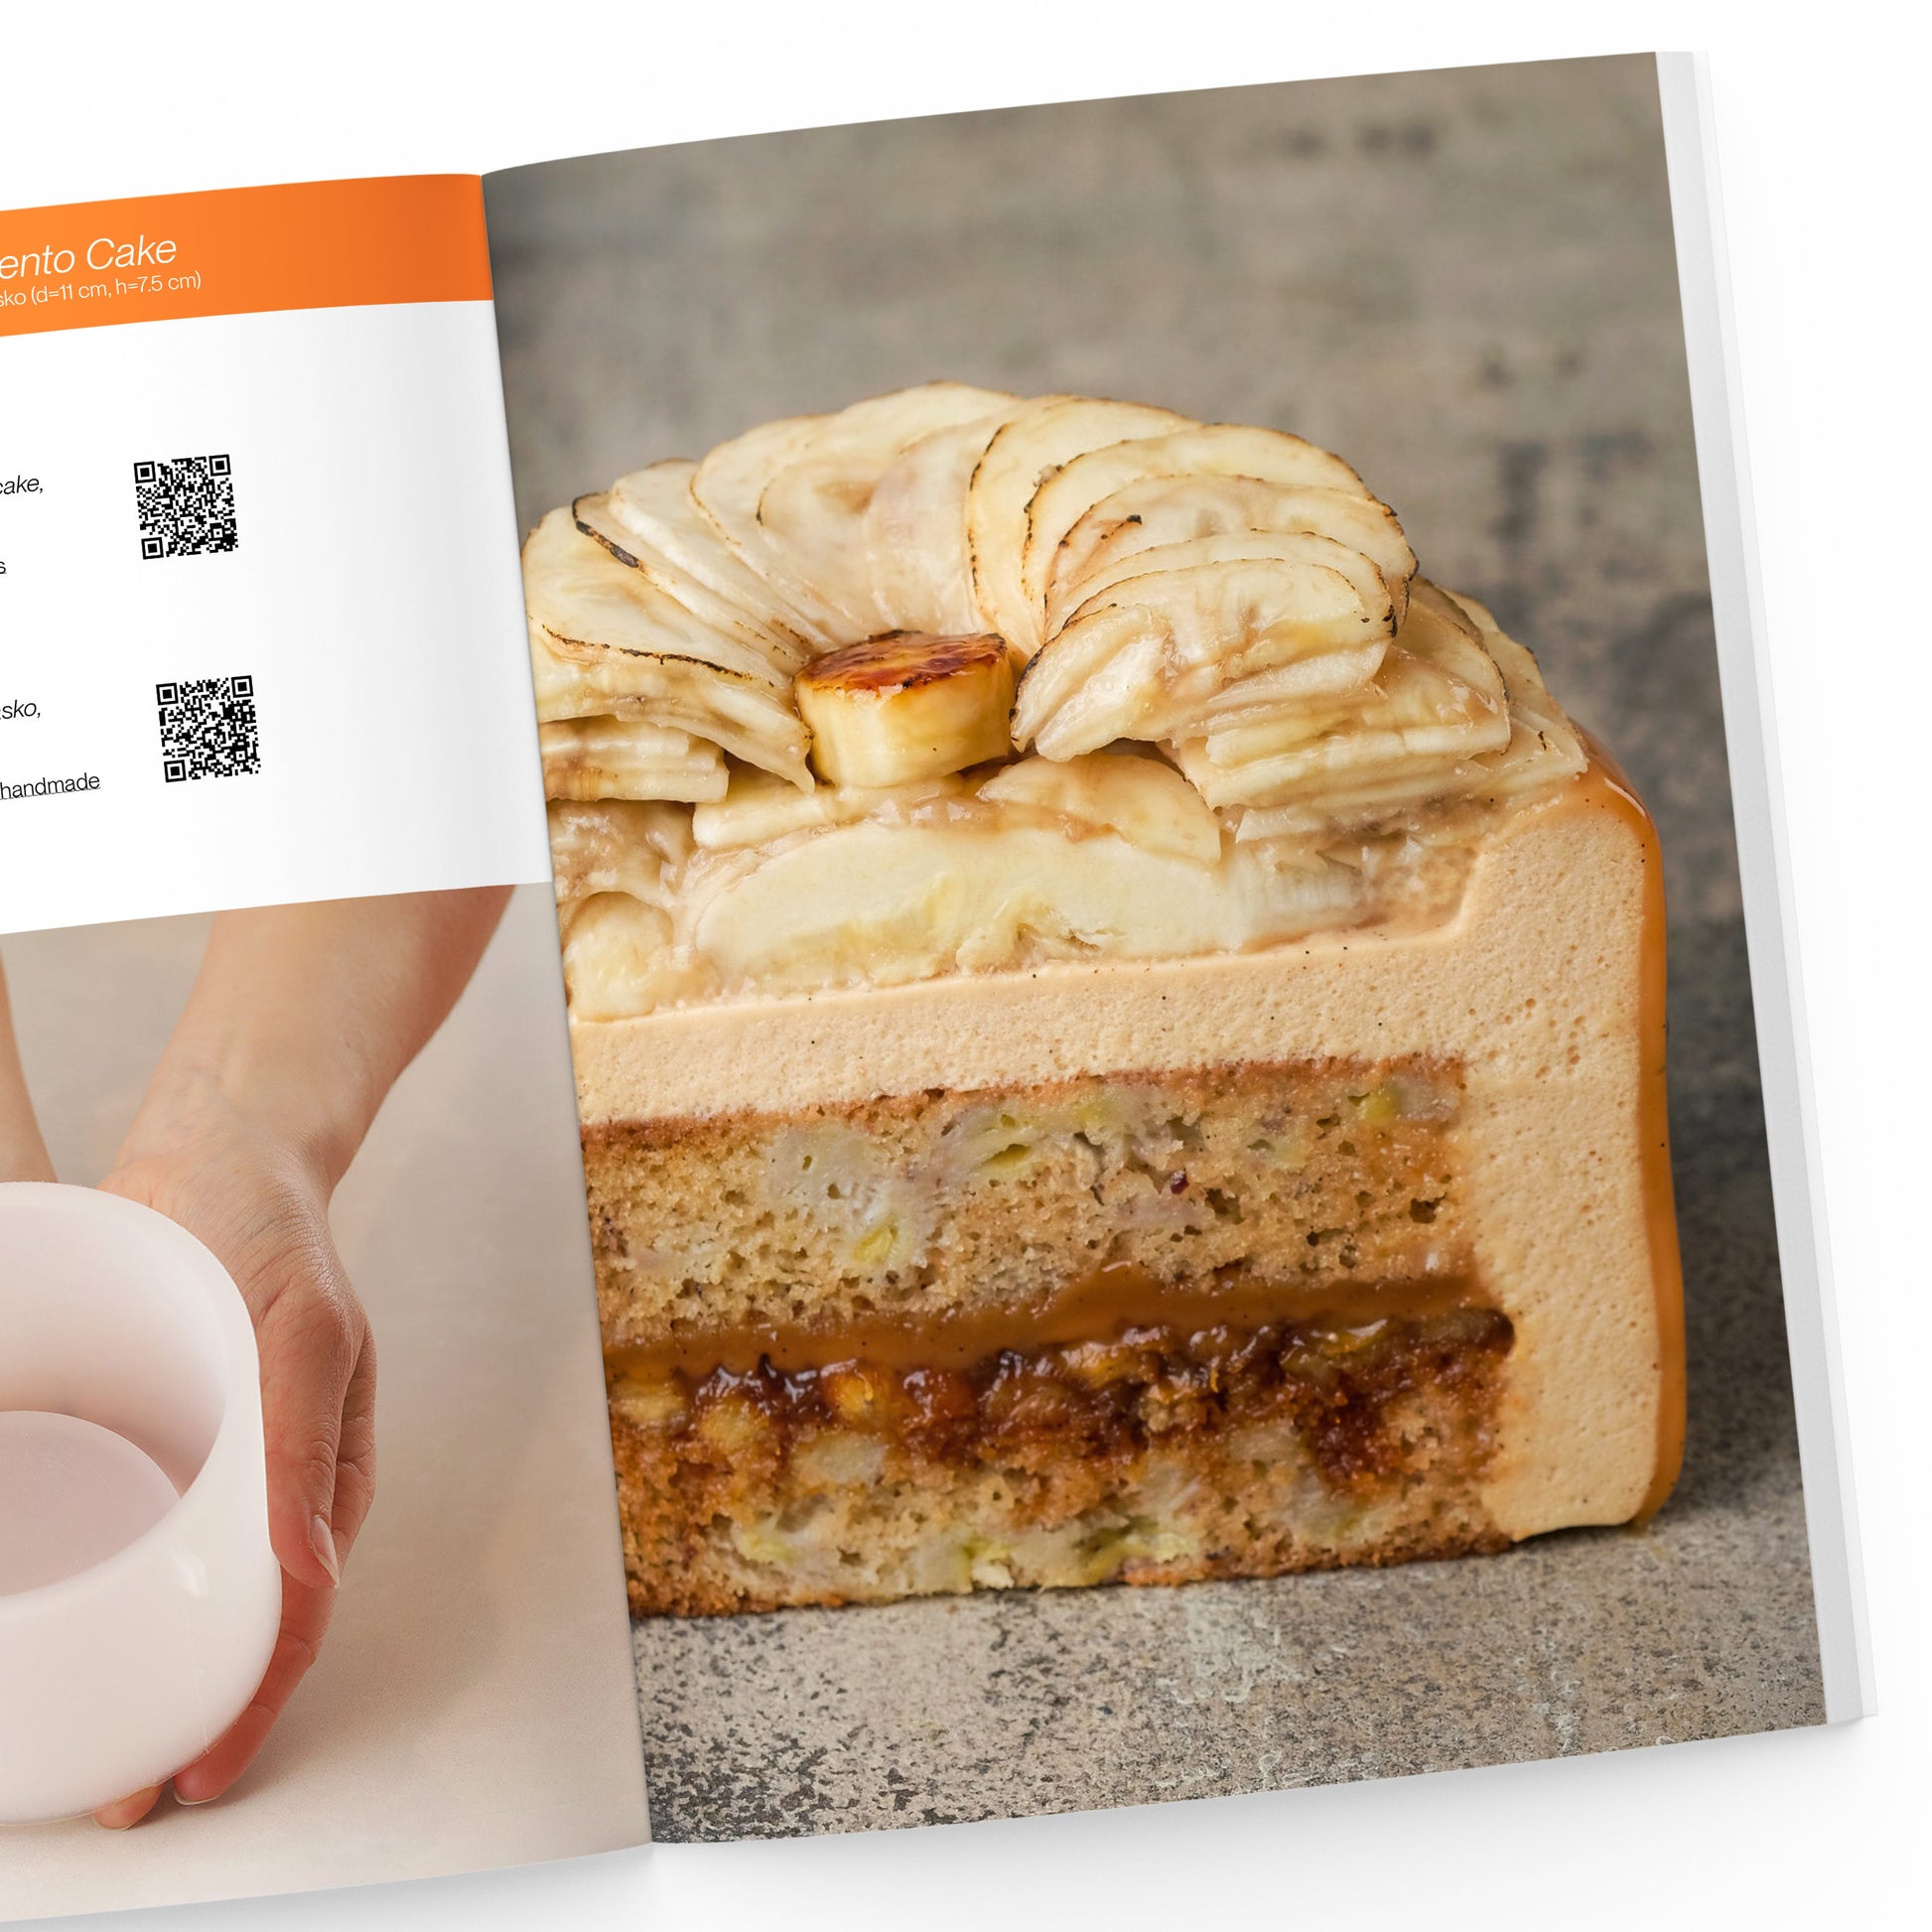 Page of Artful Bento Cakes e-book displaying Banana and Caramel Bento Cake Page with cake's cut view